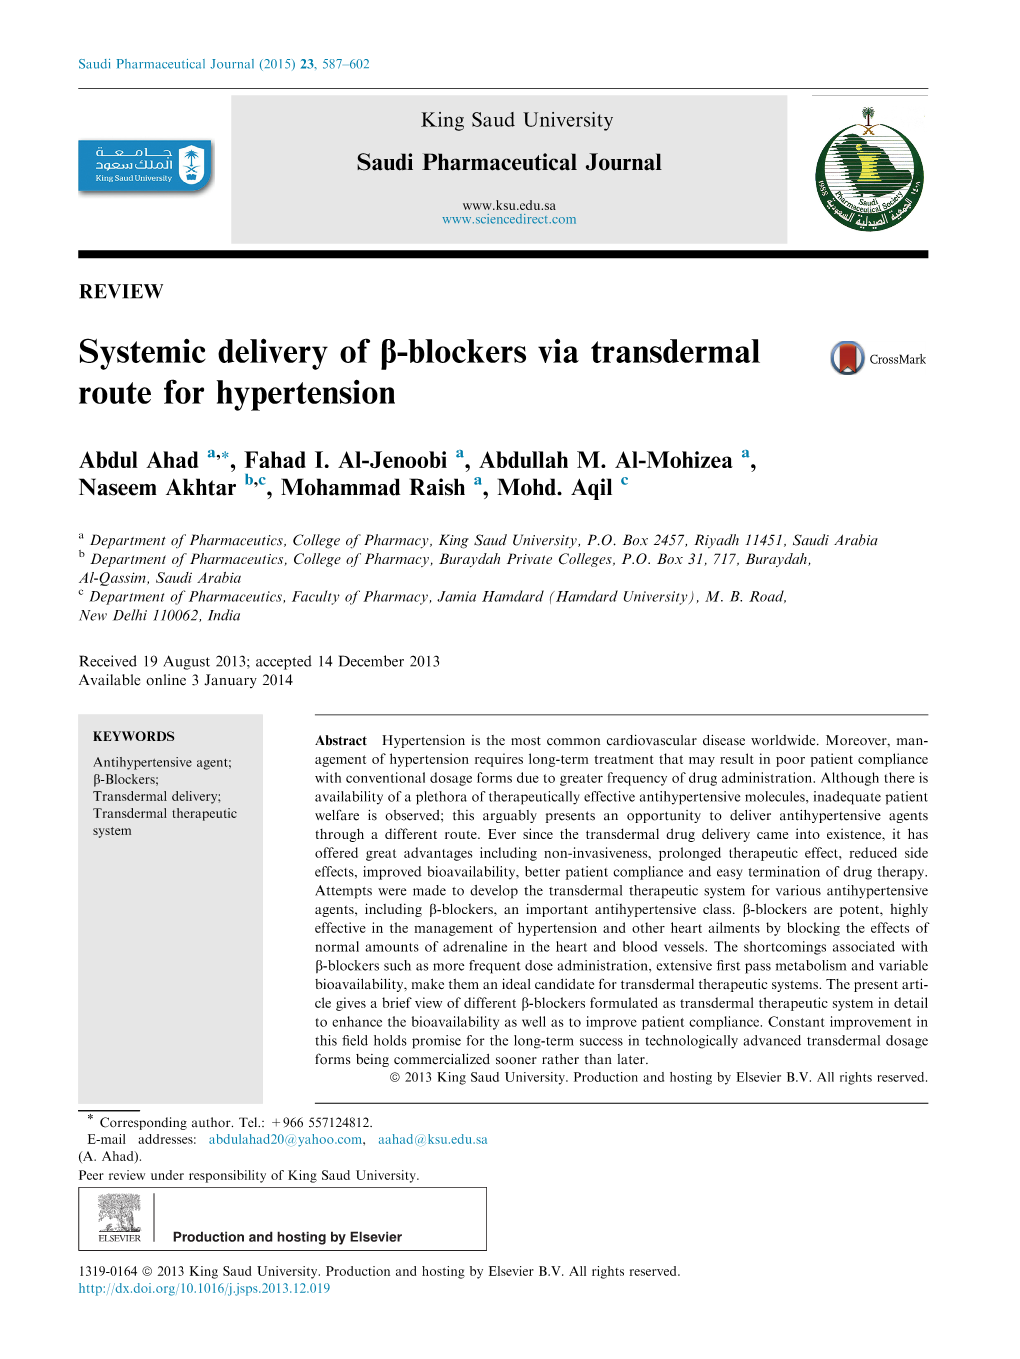 Systemic Delivery of Β-Blockers Via Transdermal Route for Hypertension